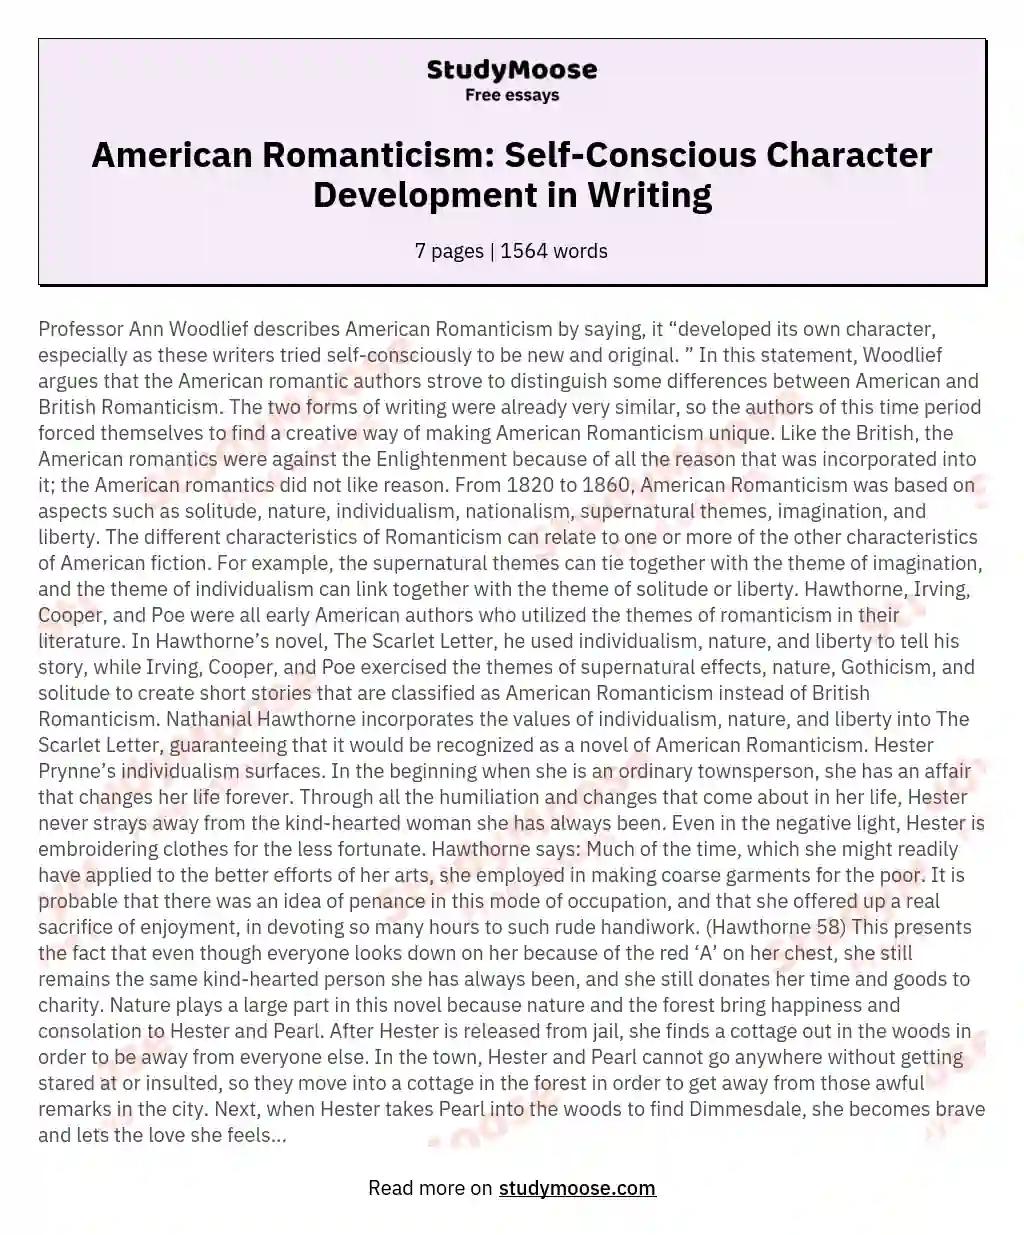 American Romanticism: Self-Conscious Character Development in Writing essay